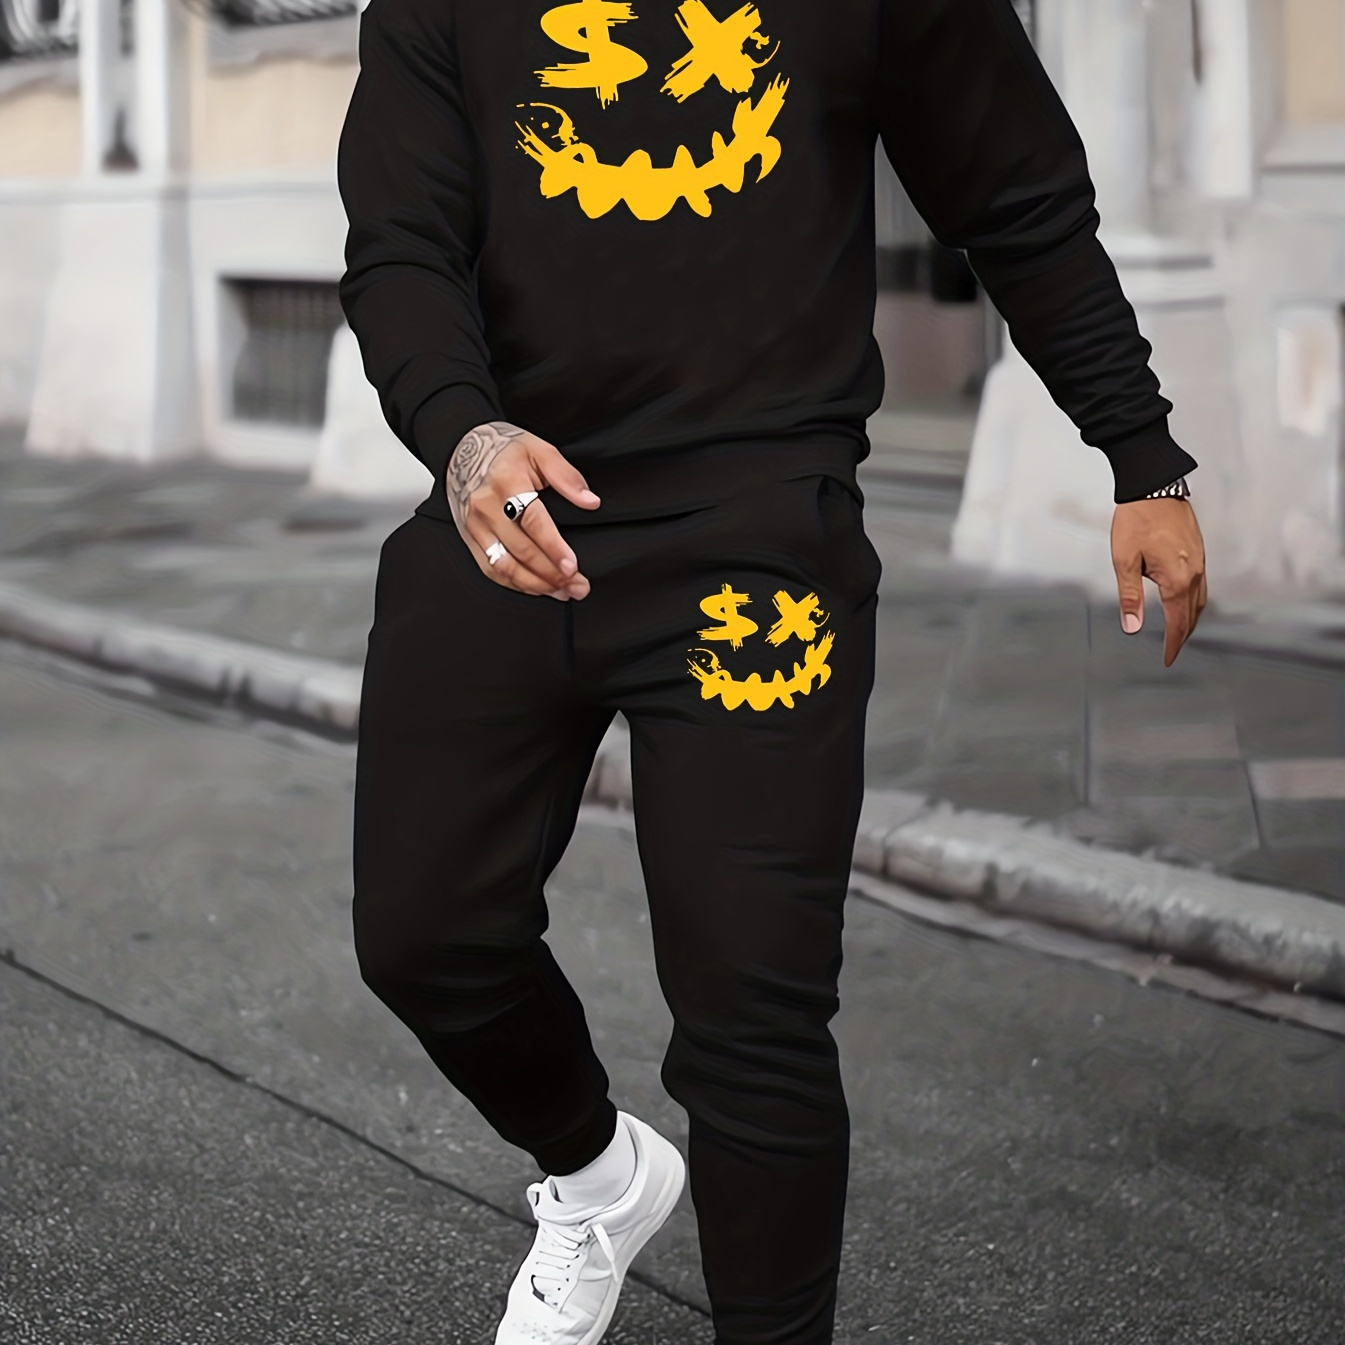 

Big Smile Print, Men's 2pcs Outfits, Casual Crew Neck Long Sleeve Pullover Sweatshirt And Drawstring Sweatpants Joggers Set For Spring Fall, Men's Clothing